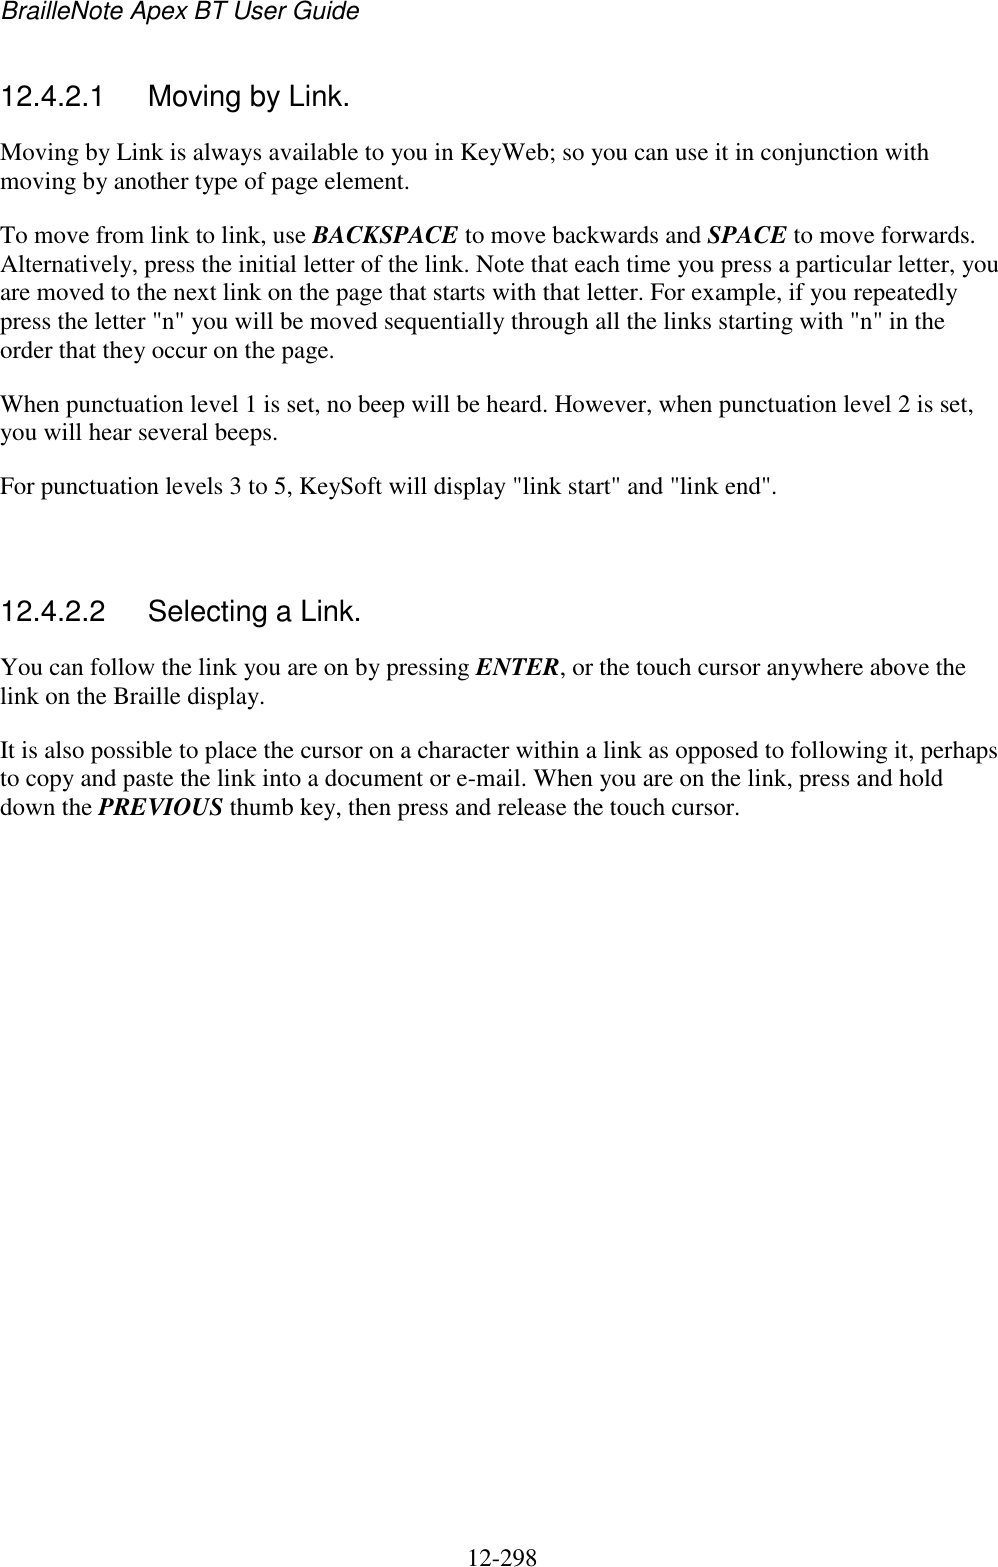 BrailleNote Apex BT User Guide   12-298   12.4.2.1  Moving by Link. Moving by Link is always available to you in KeyWeb; so you can use it in conjunction with moving by another type of page element. To move from link to link, use BACKSPACE to move backwards and SPACE to move forwards. Alternatively, press the initial letter of the link. Note that each time you press a particular letter, you are moved to the next link on the page that starts with that letter. For example, if you repeatedly press the letter &quot;n&quot; you will be moved sequentially through all the links starting with &quot;n&quot; in the order that they occur on the page. When punctuation level 1 is set, no beep will be heard. However, when punctuation level 2 is set, you will hear several beeps. For punctuation levels 3 to 5, KeySoft will display &quot;link start&quot; and &quot;link end&quot;.   12.4.2.2  Selecting a Link. You can follow the link you are on by pressing ENTER, or the touch cursor anywhere above the link on the Braille display. It is also possible to place the cursor on a character within a link as opposed to following it, perhaps to copy and paste the link into a document or e-mail. When you are on the link, press and hold down the PREVIOUS thumb key, then press and release the touch cursor.   